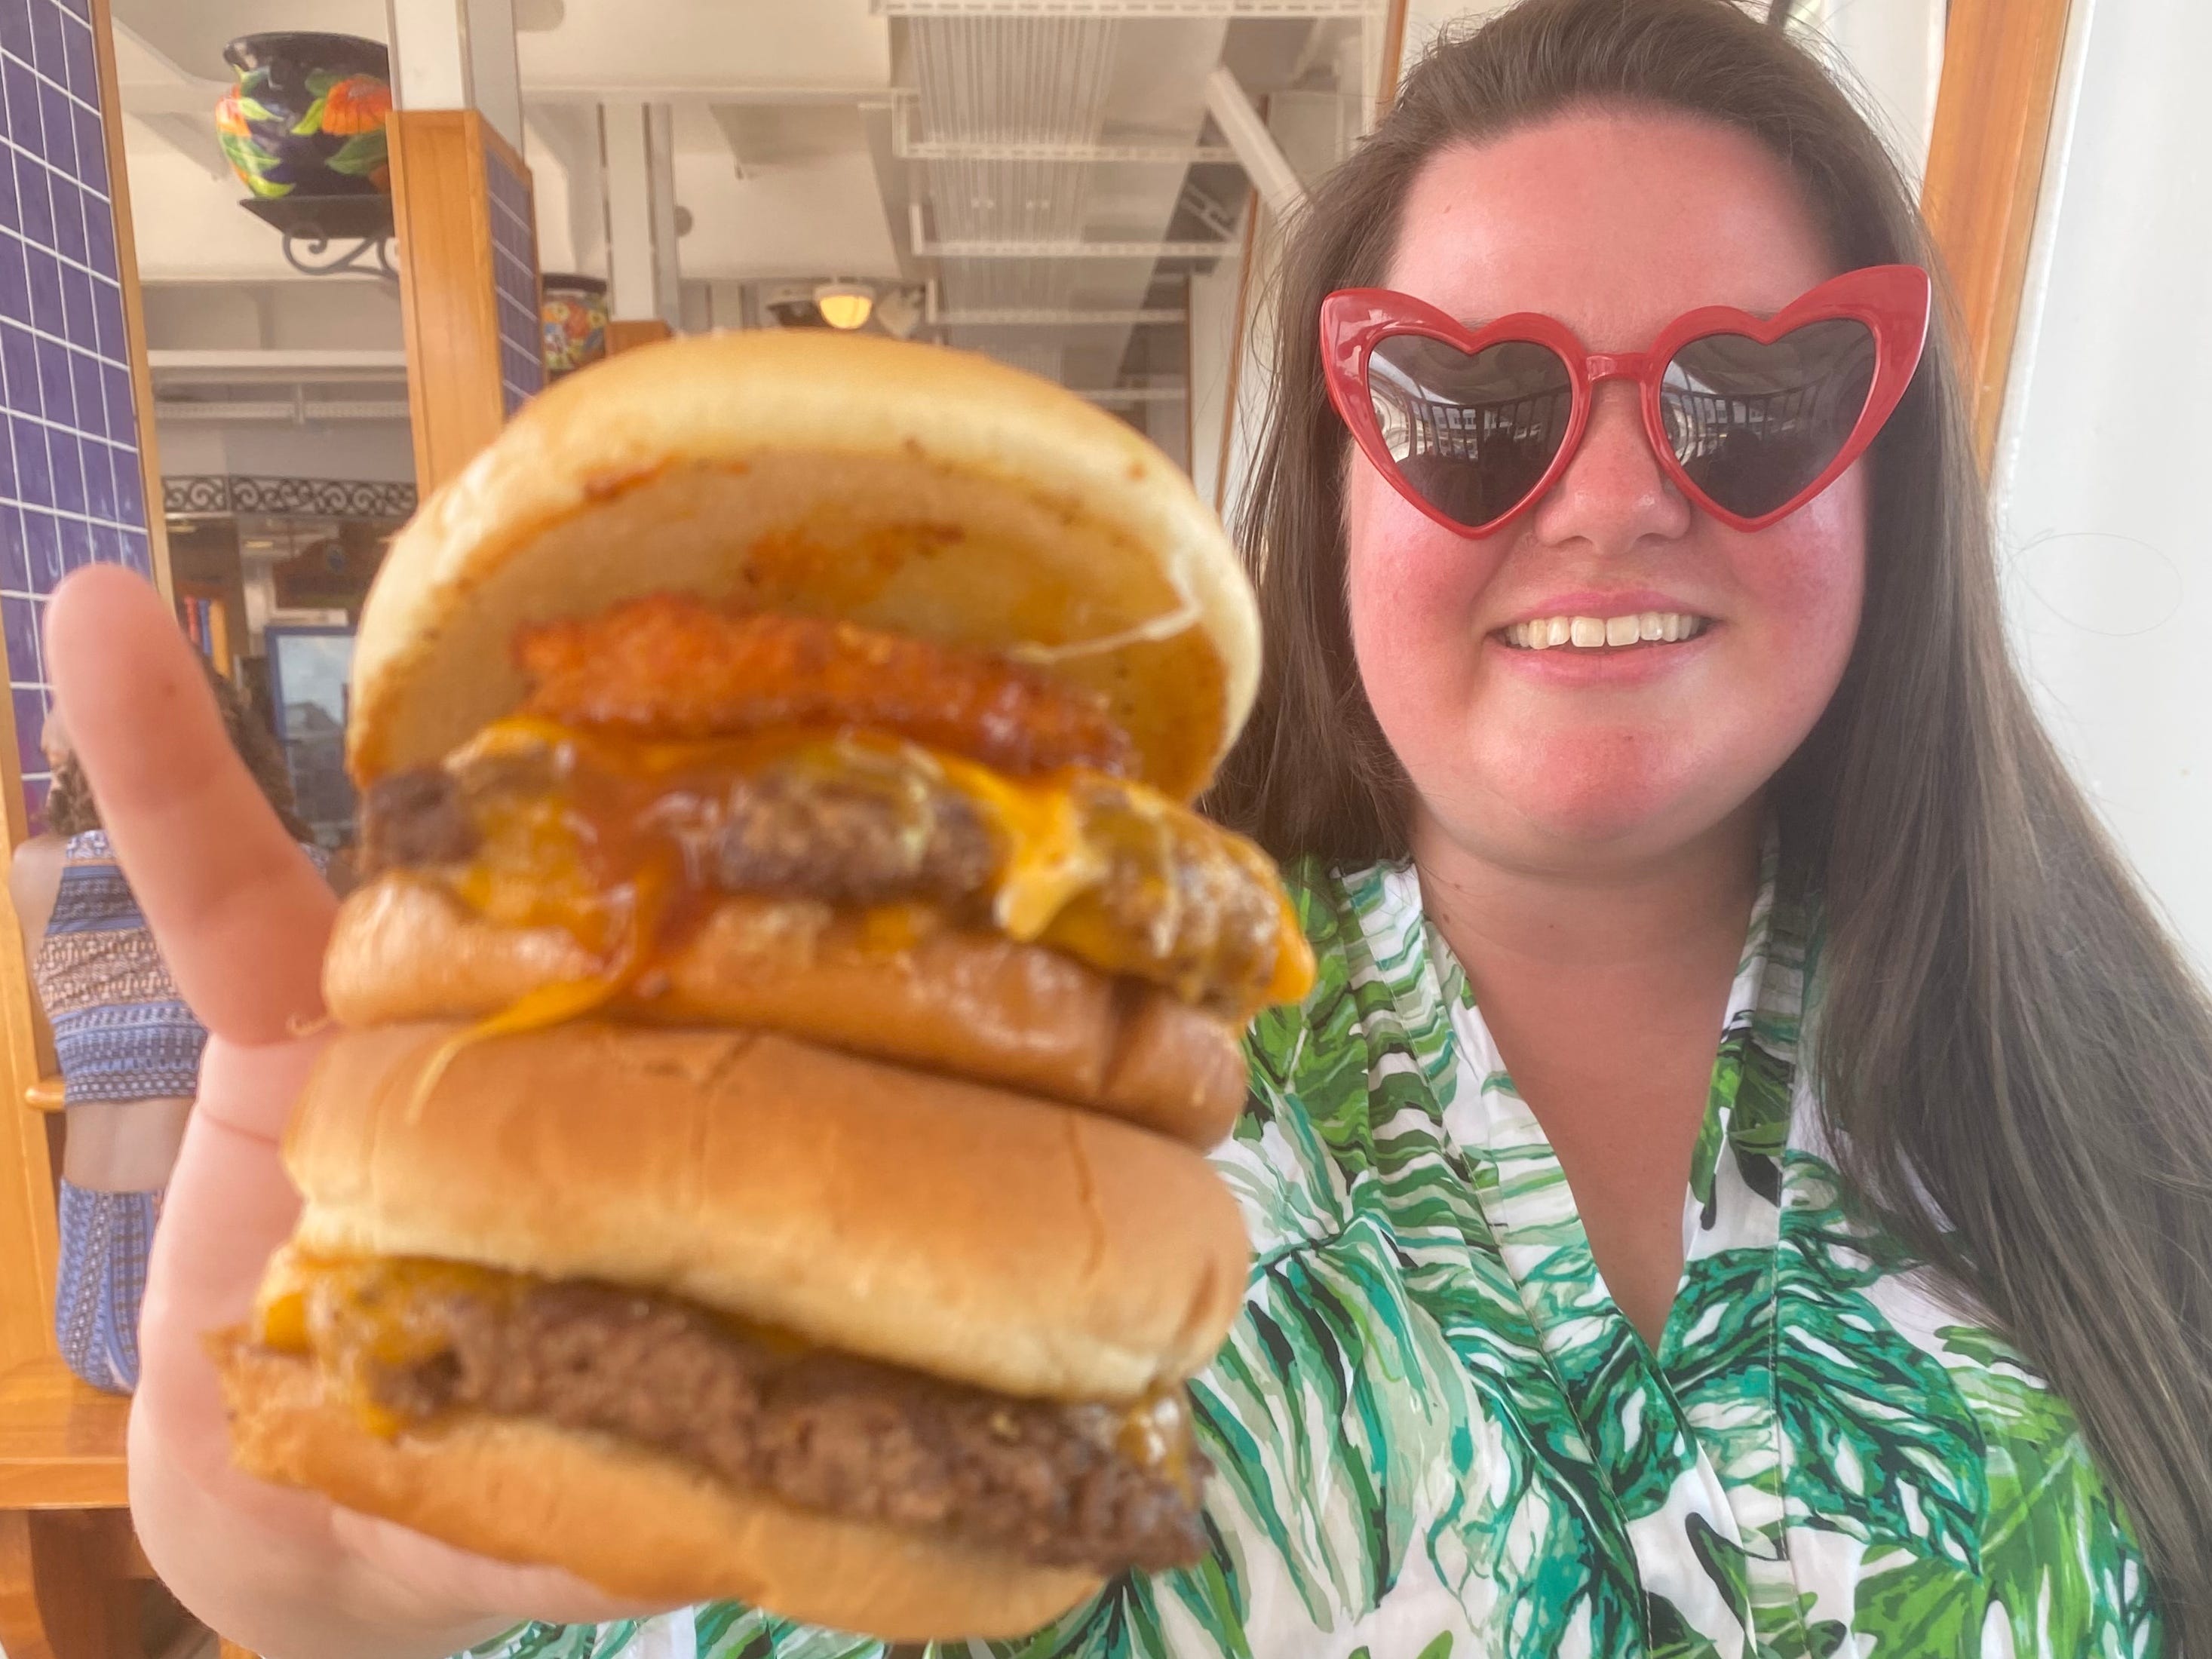 <p>When I first boarded the ship, I ordered one of every burger on the menu, along with a side of fries, to test out the menu.</p><p>That way, I could decide which burger would be my go-to selection for the rest of the weekend.</p>